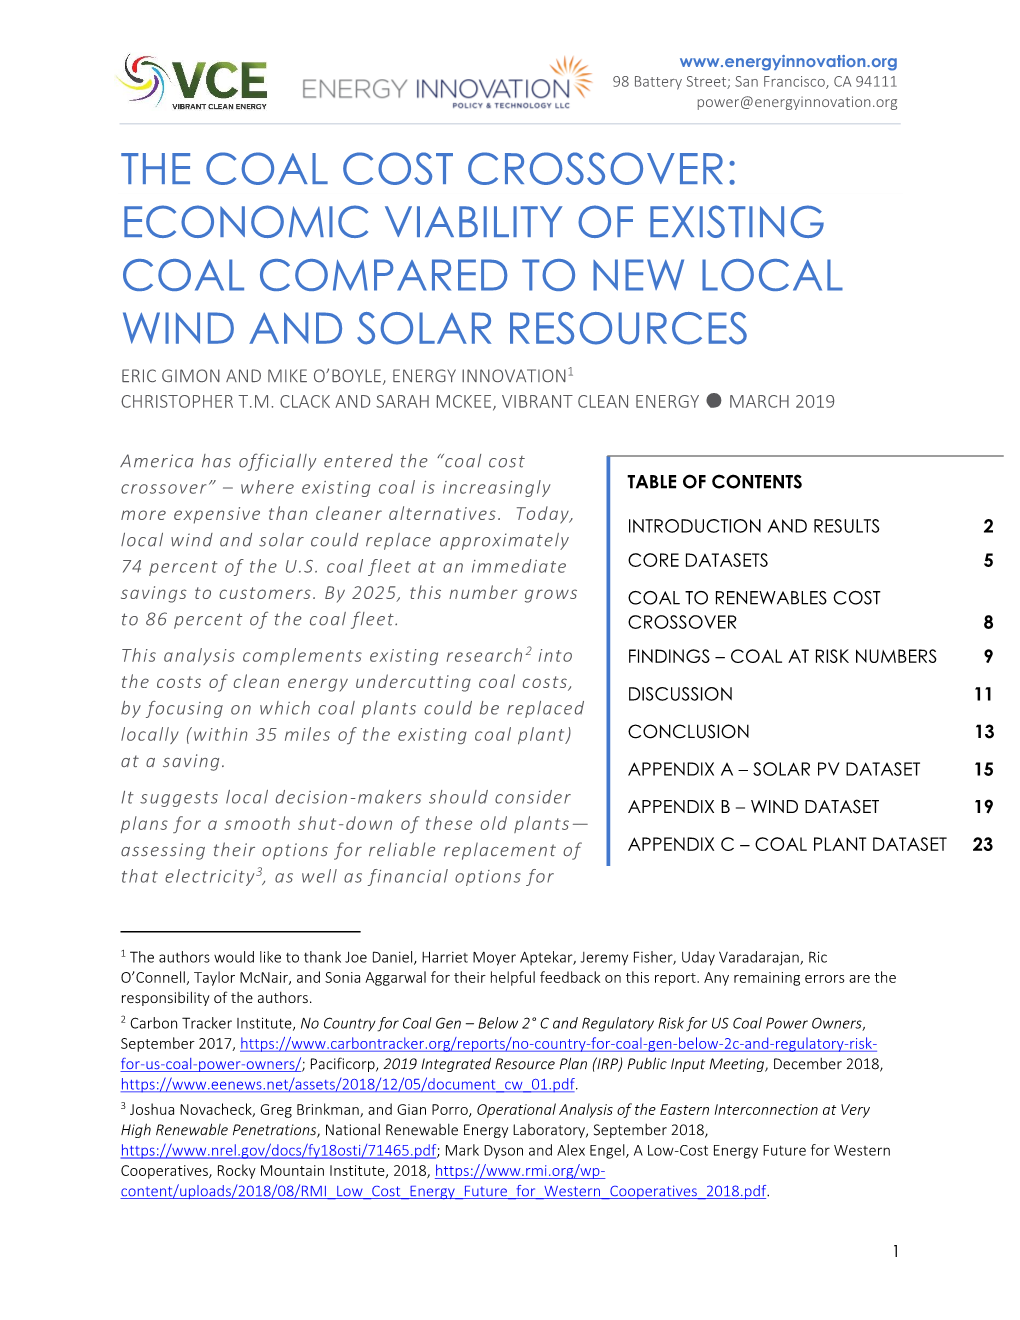 The Coal Cost Crossover: Economic Viability of Existing Coal Compared